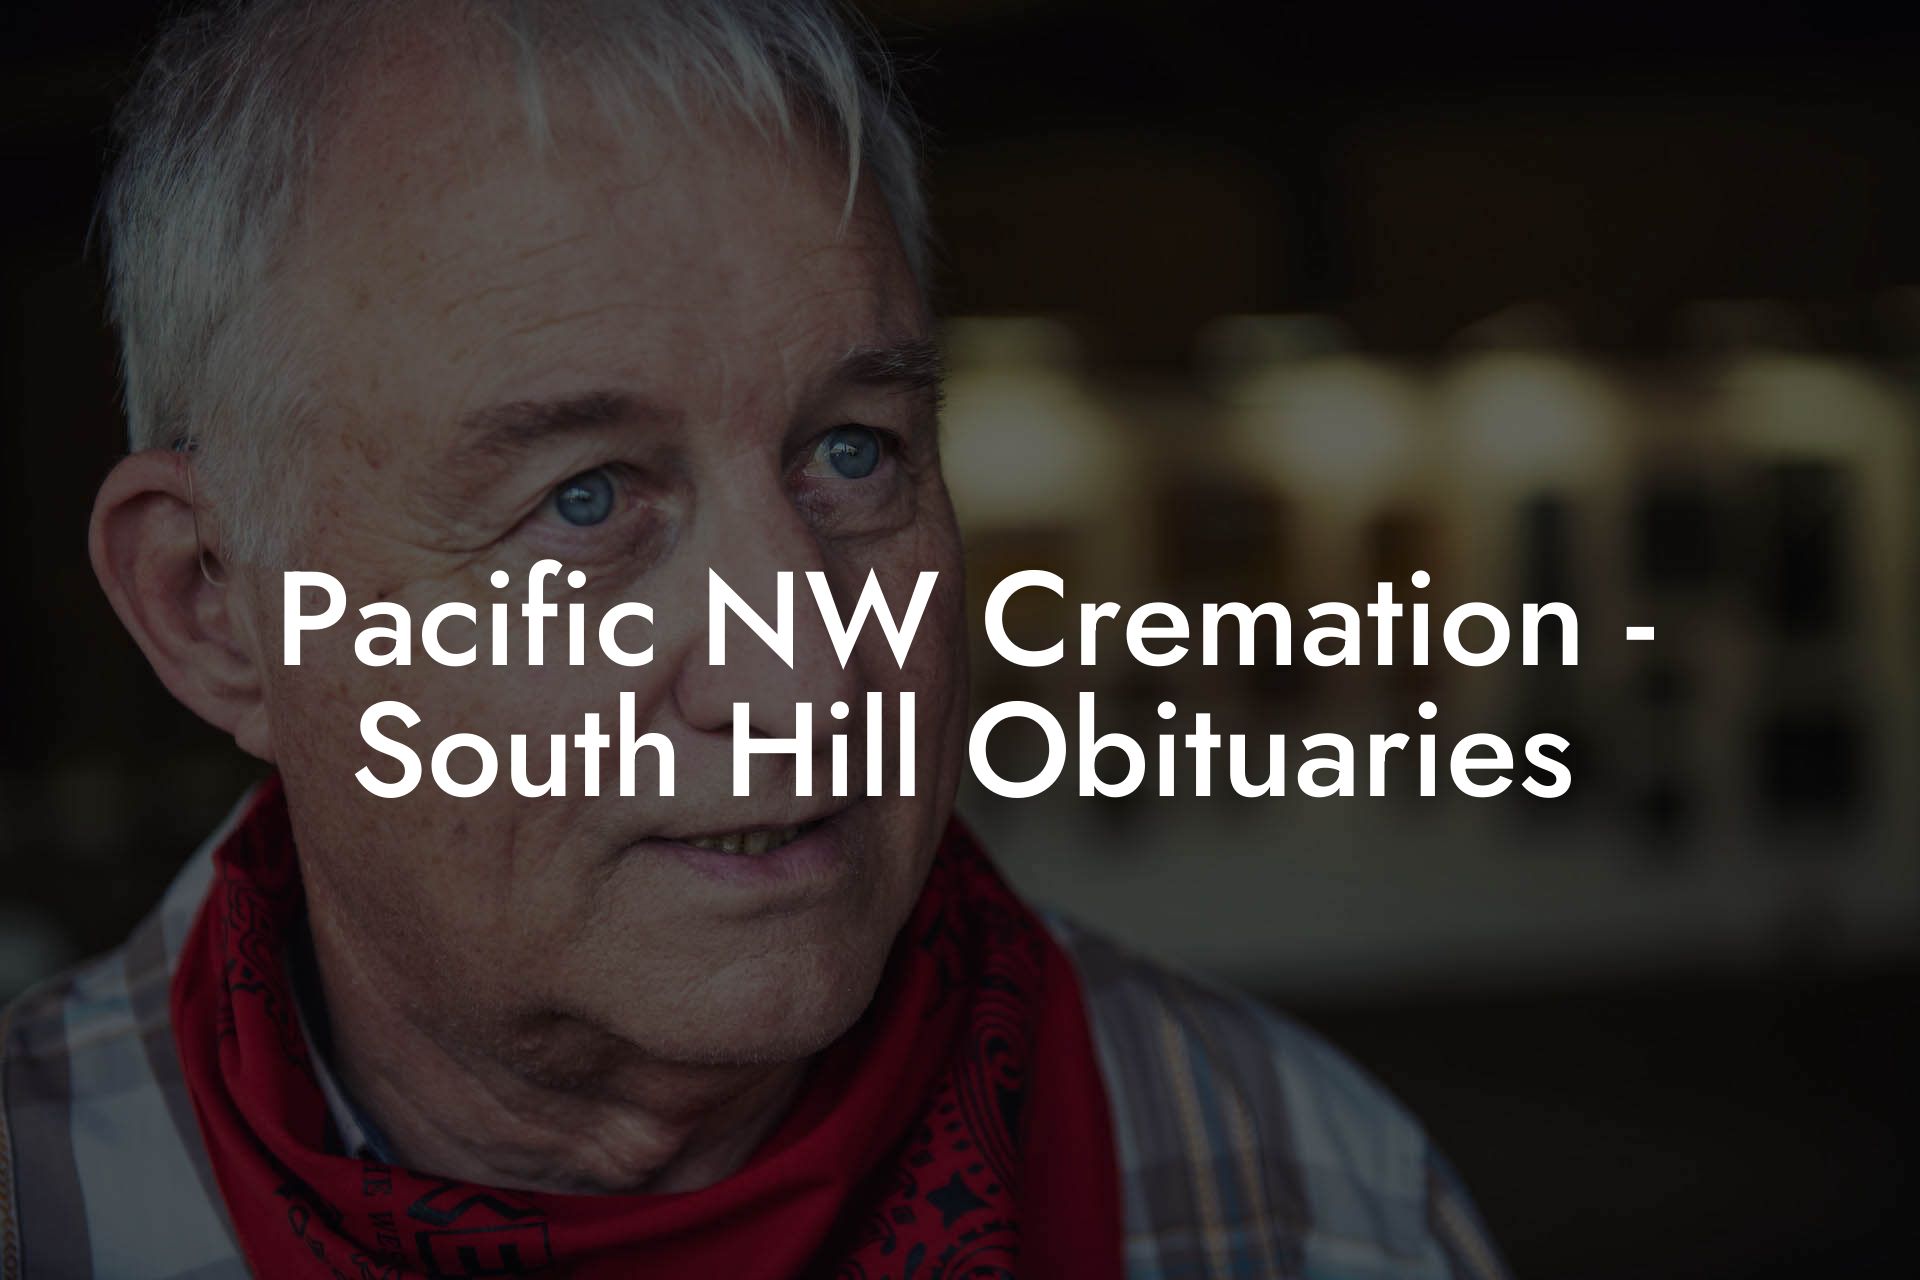 Pacific NW Cremation - South Hill Obituaries